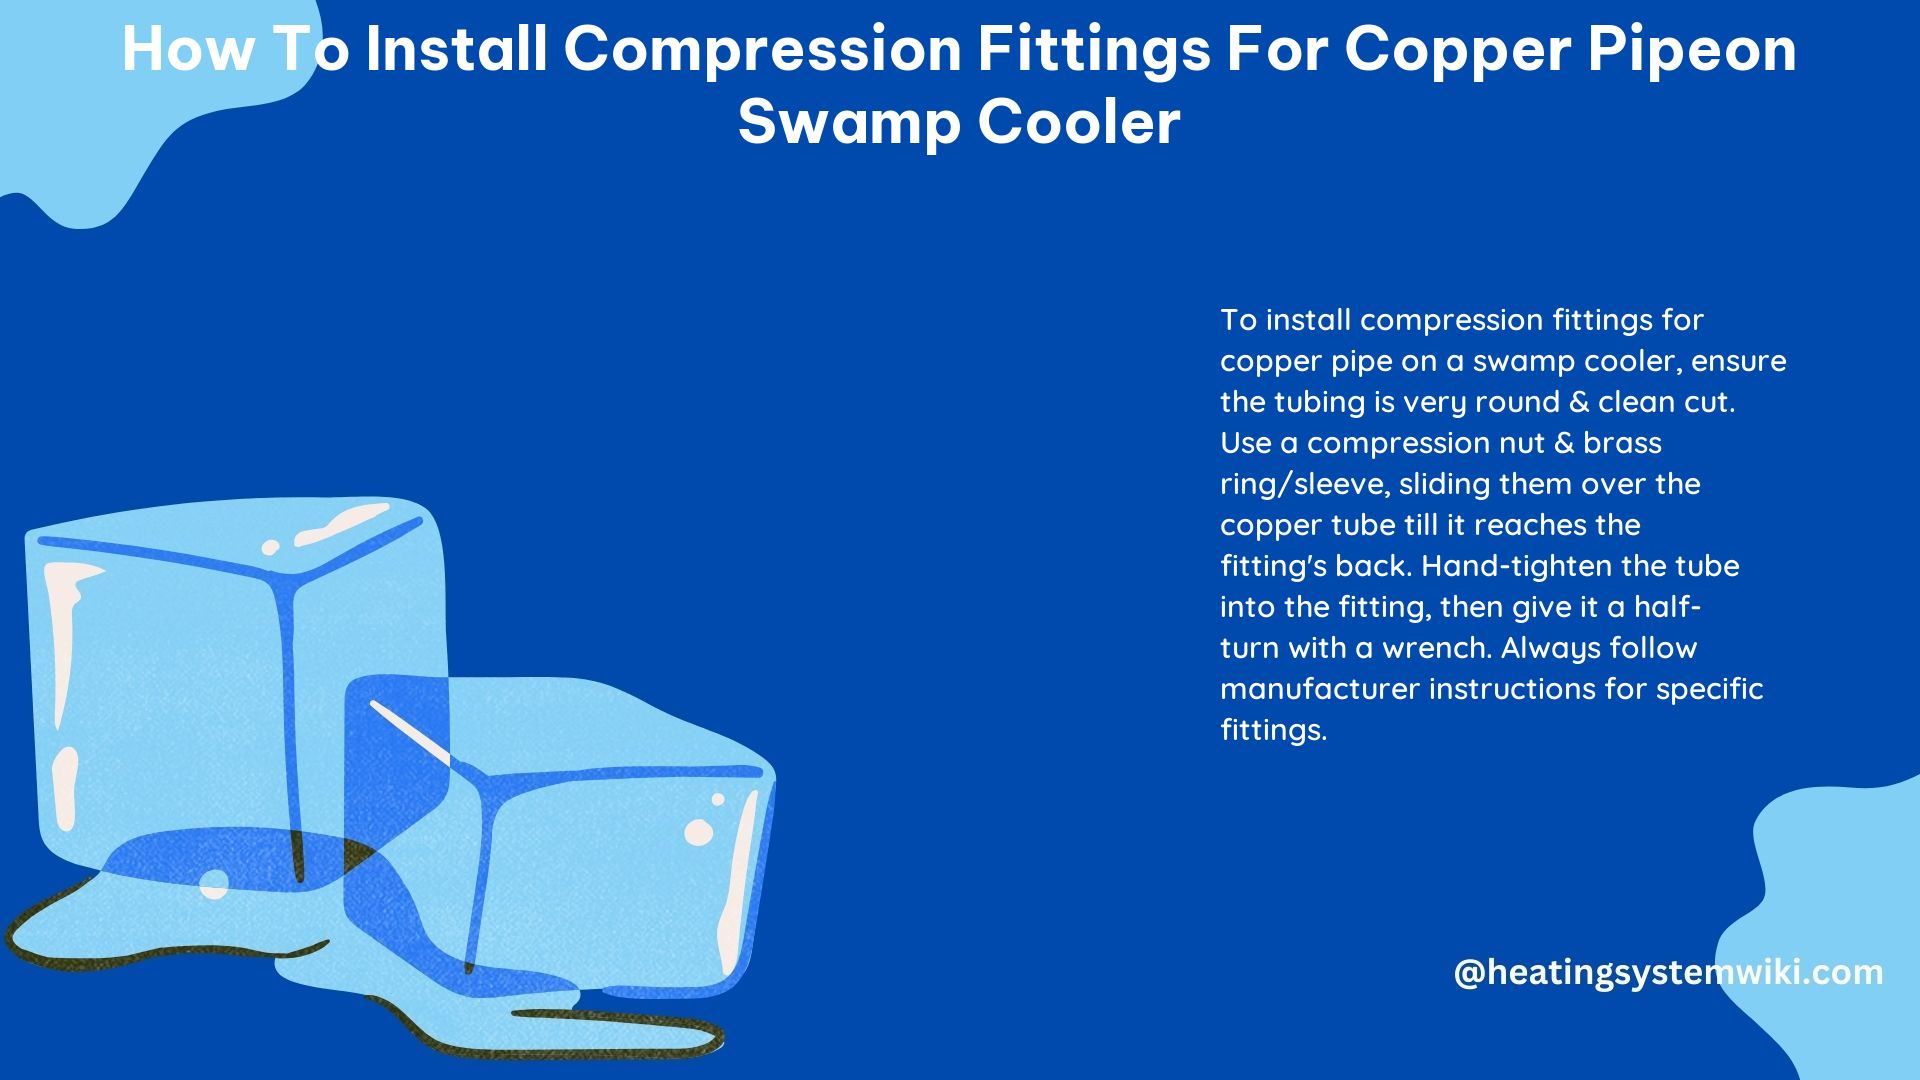 How to Install Compression Fittings for Copper Pipeon Swamp Cooler